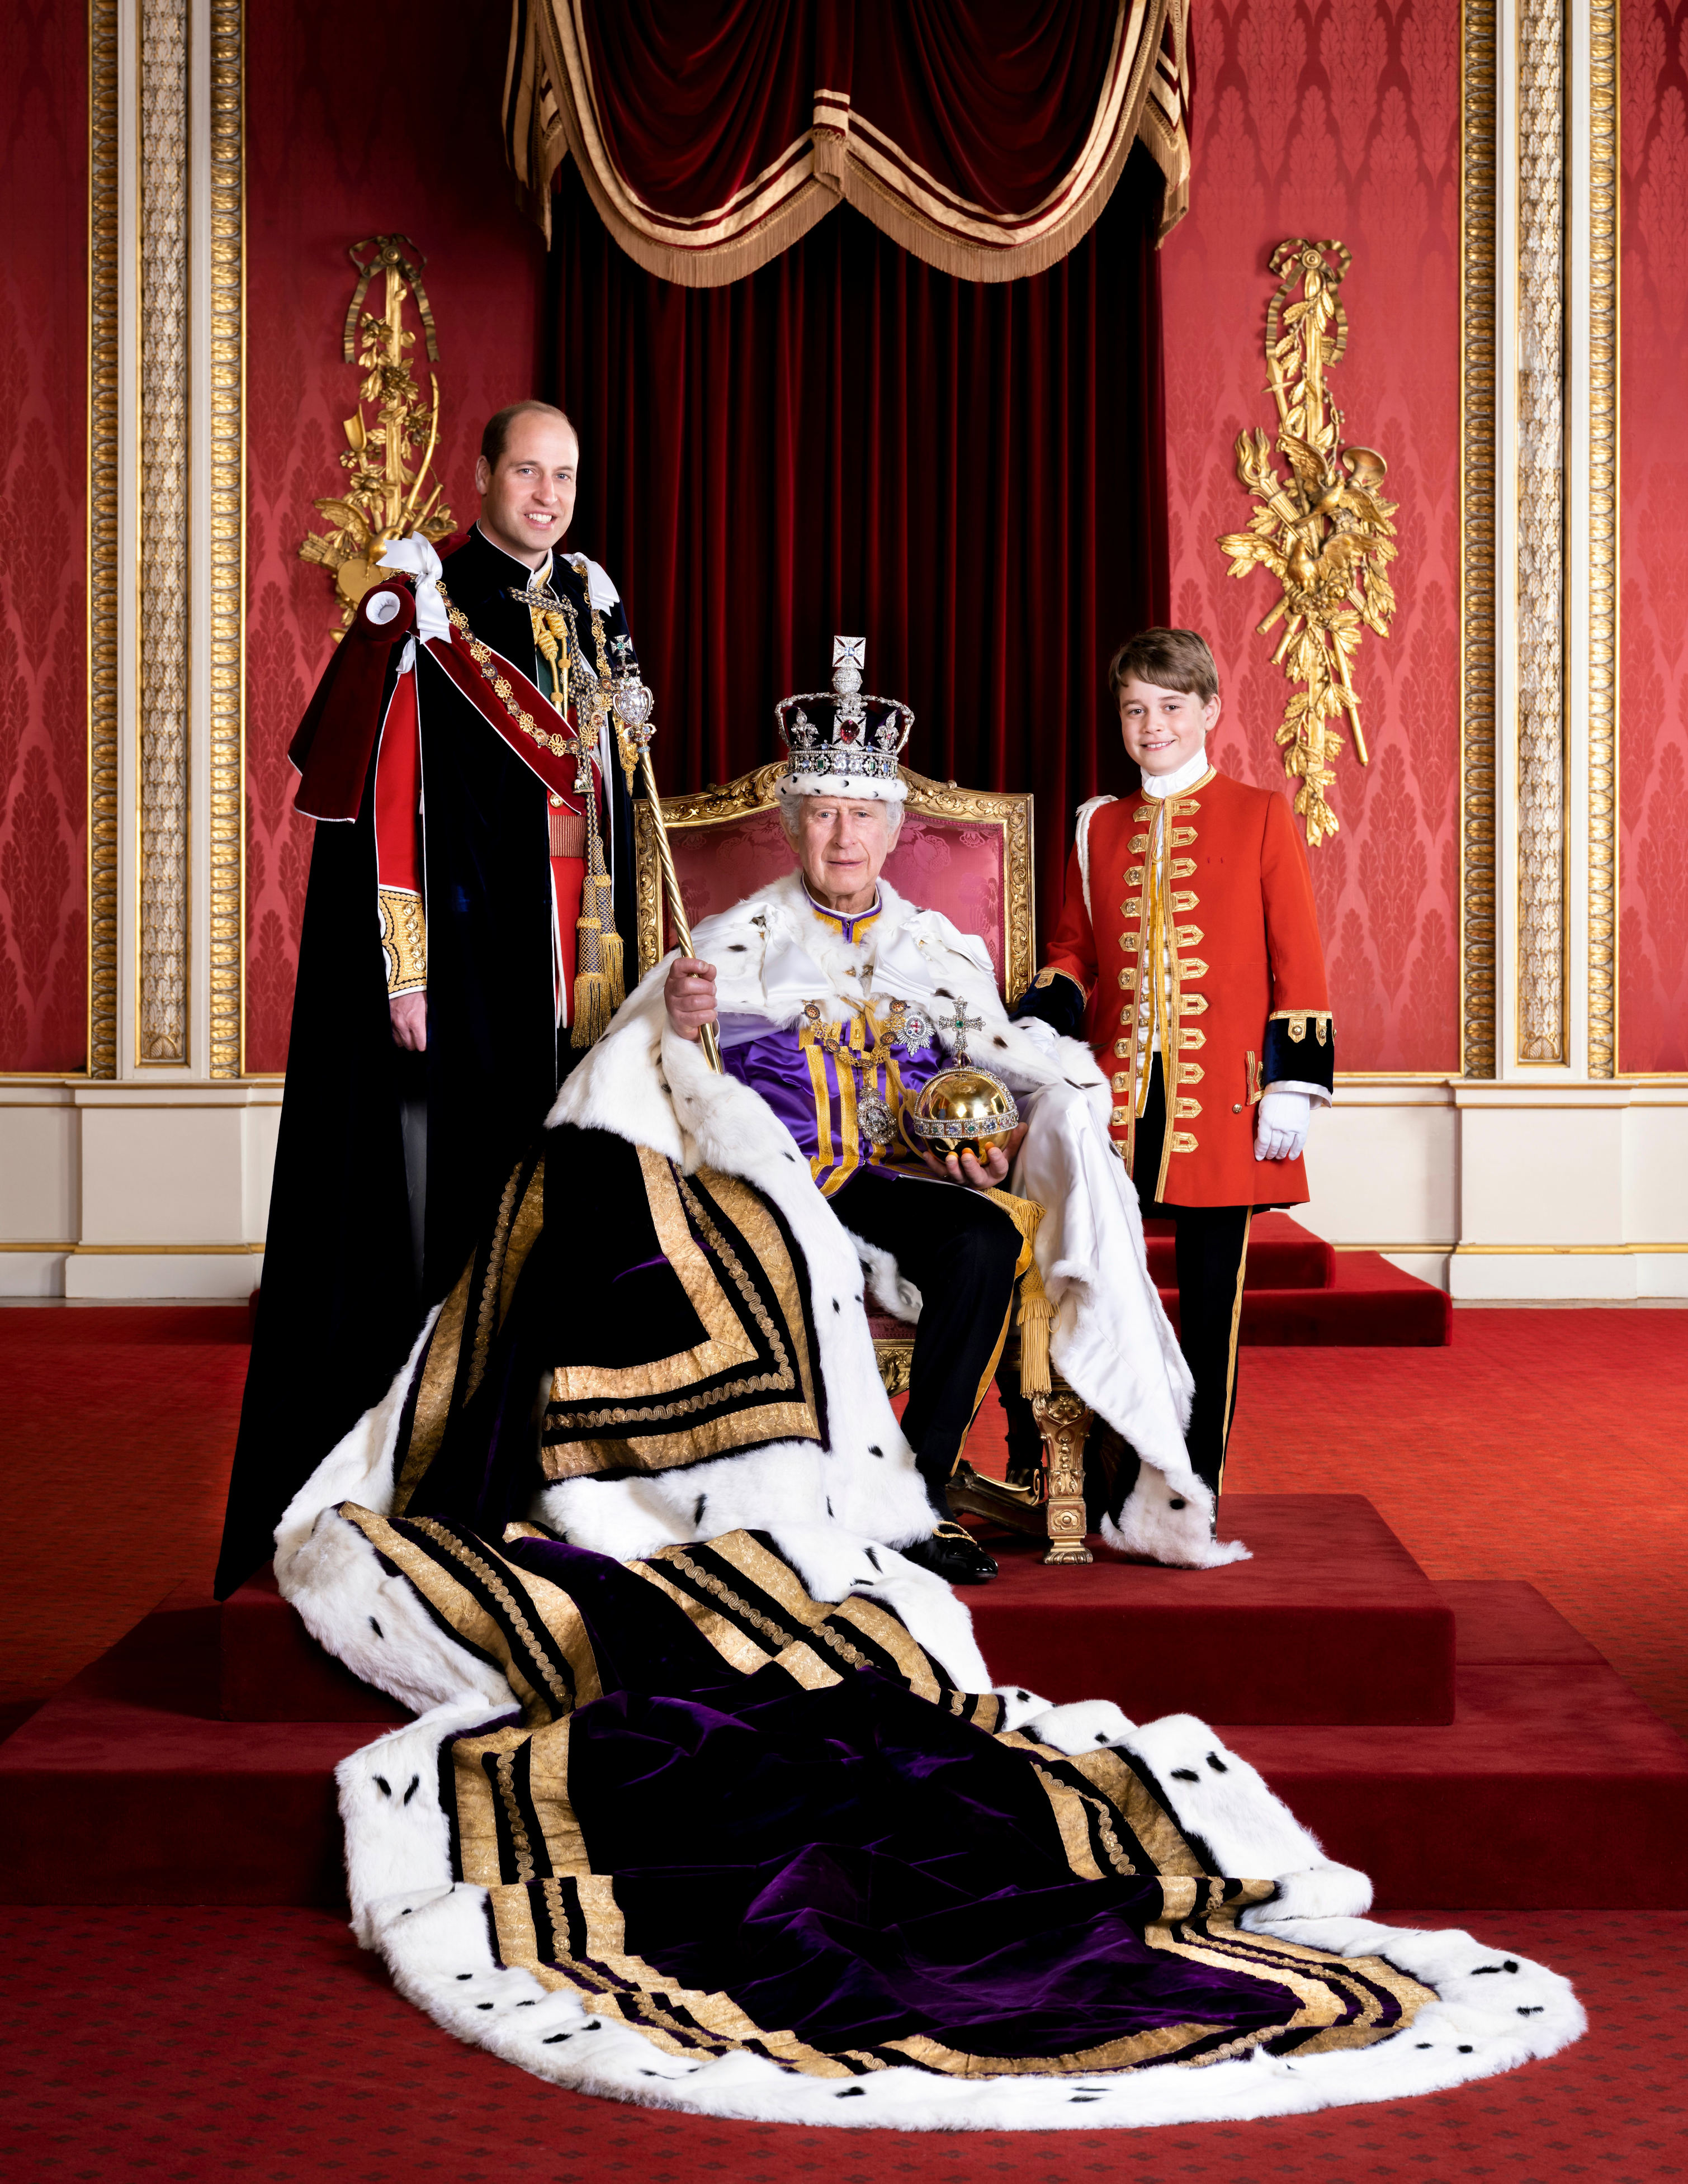 <p>King Charles III and his heirs -- <a href="https://www.wonderwall.com/celebrity/profiles/overview/prince-william-482.article">Prince William</a> and Prince George -- are pictured in the Throne Room at Buckingham Palace in London on <a href="https://www.wonderwall.com/celebrity/the-coronation-of-king-charles-iii-and-queen-camilla-the-best-pictures-of-all-the-royals-at-this-historic-event-735015.gallery">coronation day</a>, May 6, 2023, in an official coronation portrait released by the palace. </p>